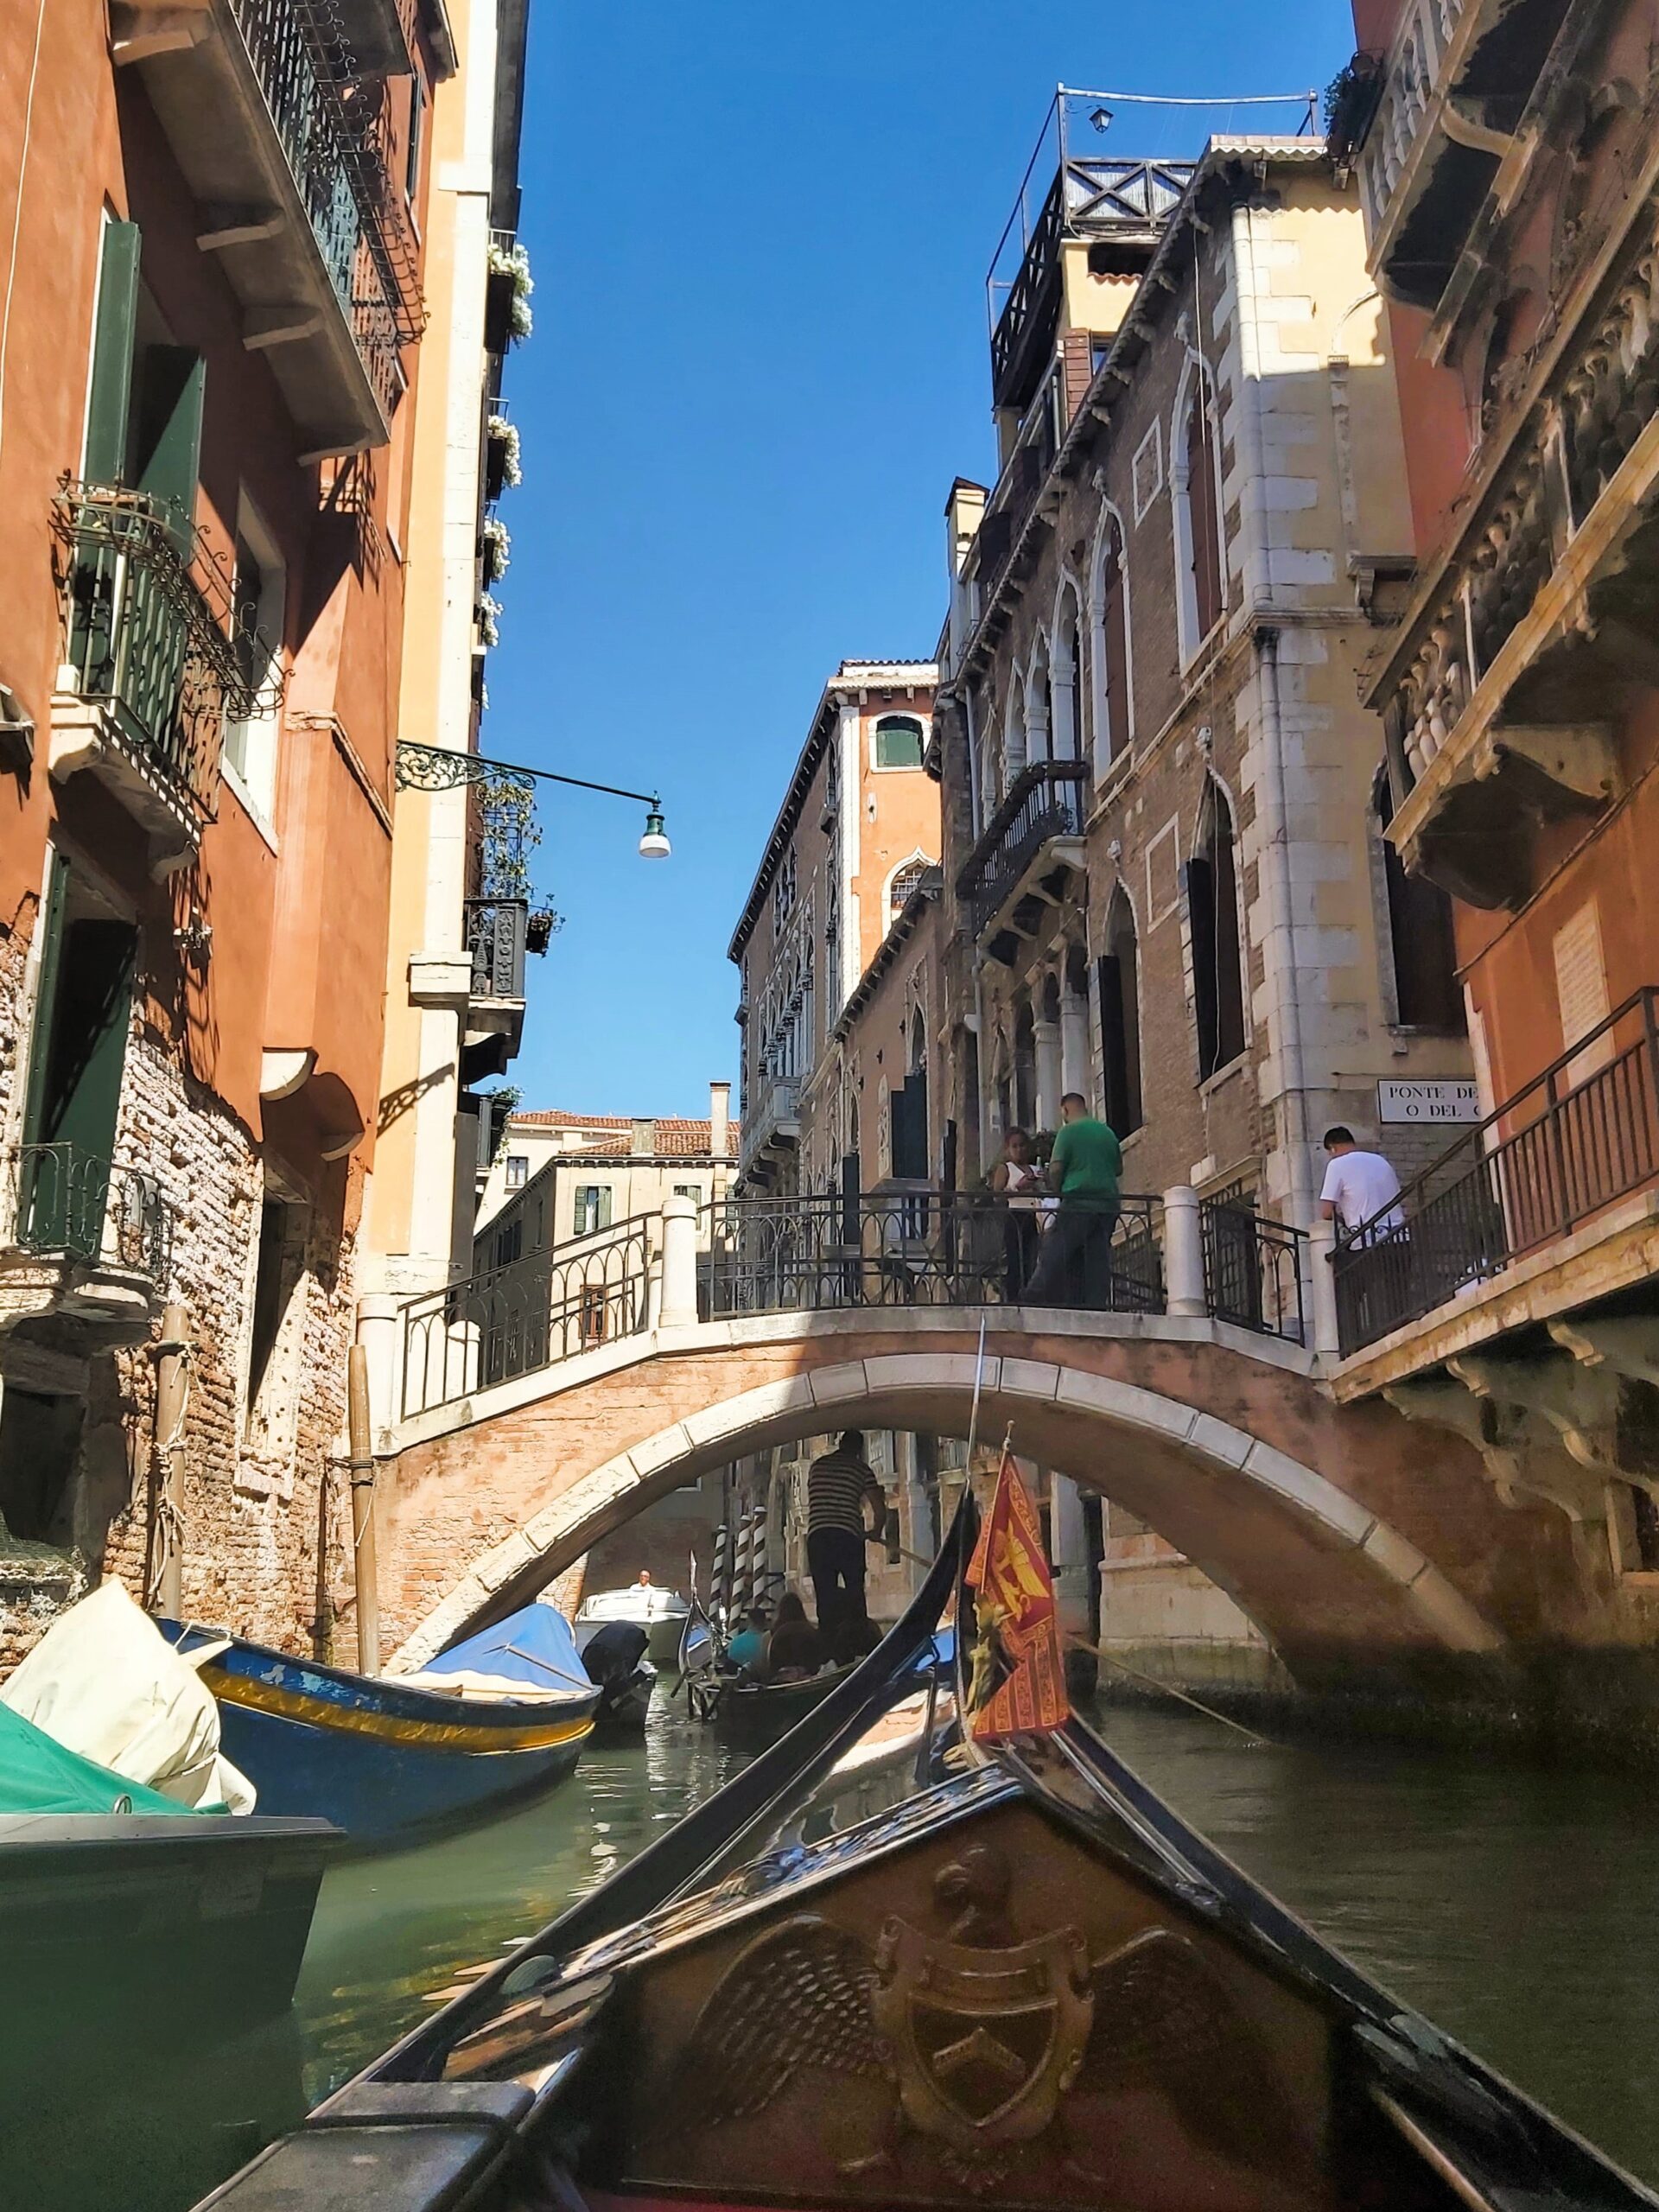 A view from a gondola approaching a bridge in Venice, Italy